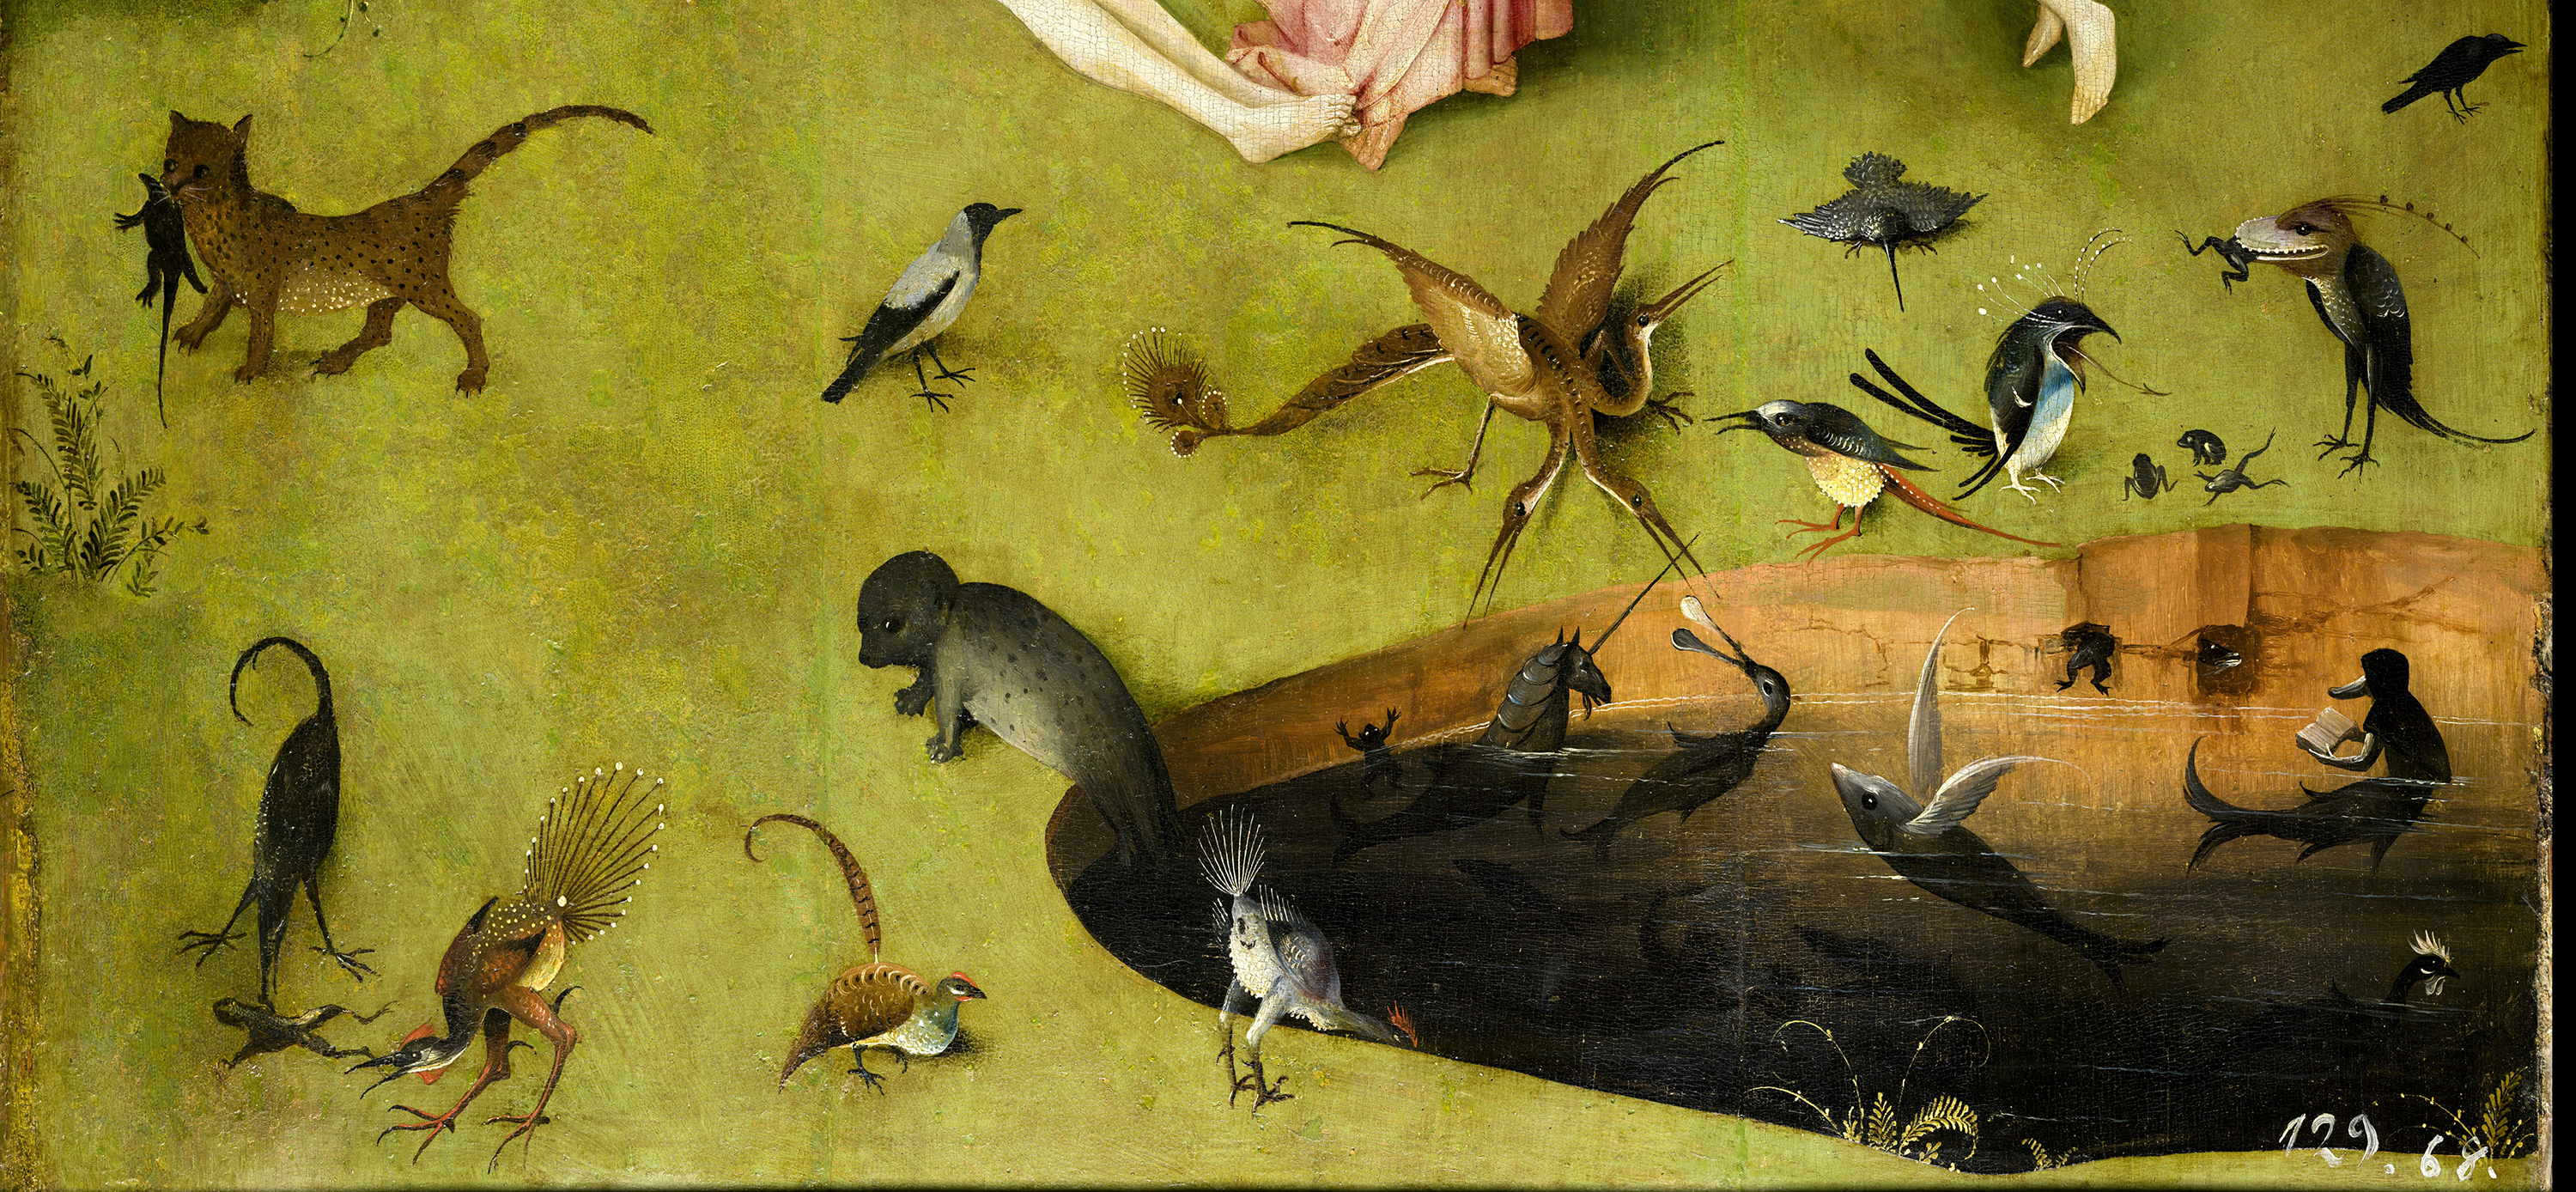 Hieronymus Bosch, The Garden of Earthly Delights (Detail of Pond), oil on oak plank, 1500-05 (Museo Nacional del Prado, Madrid). Photo: Public Domain.